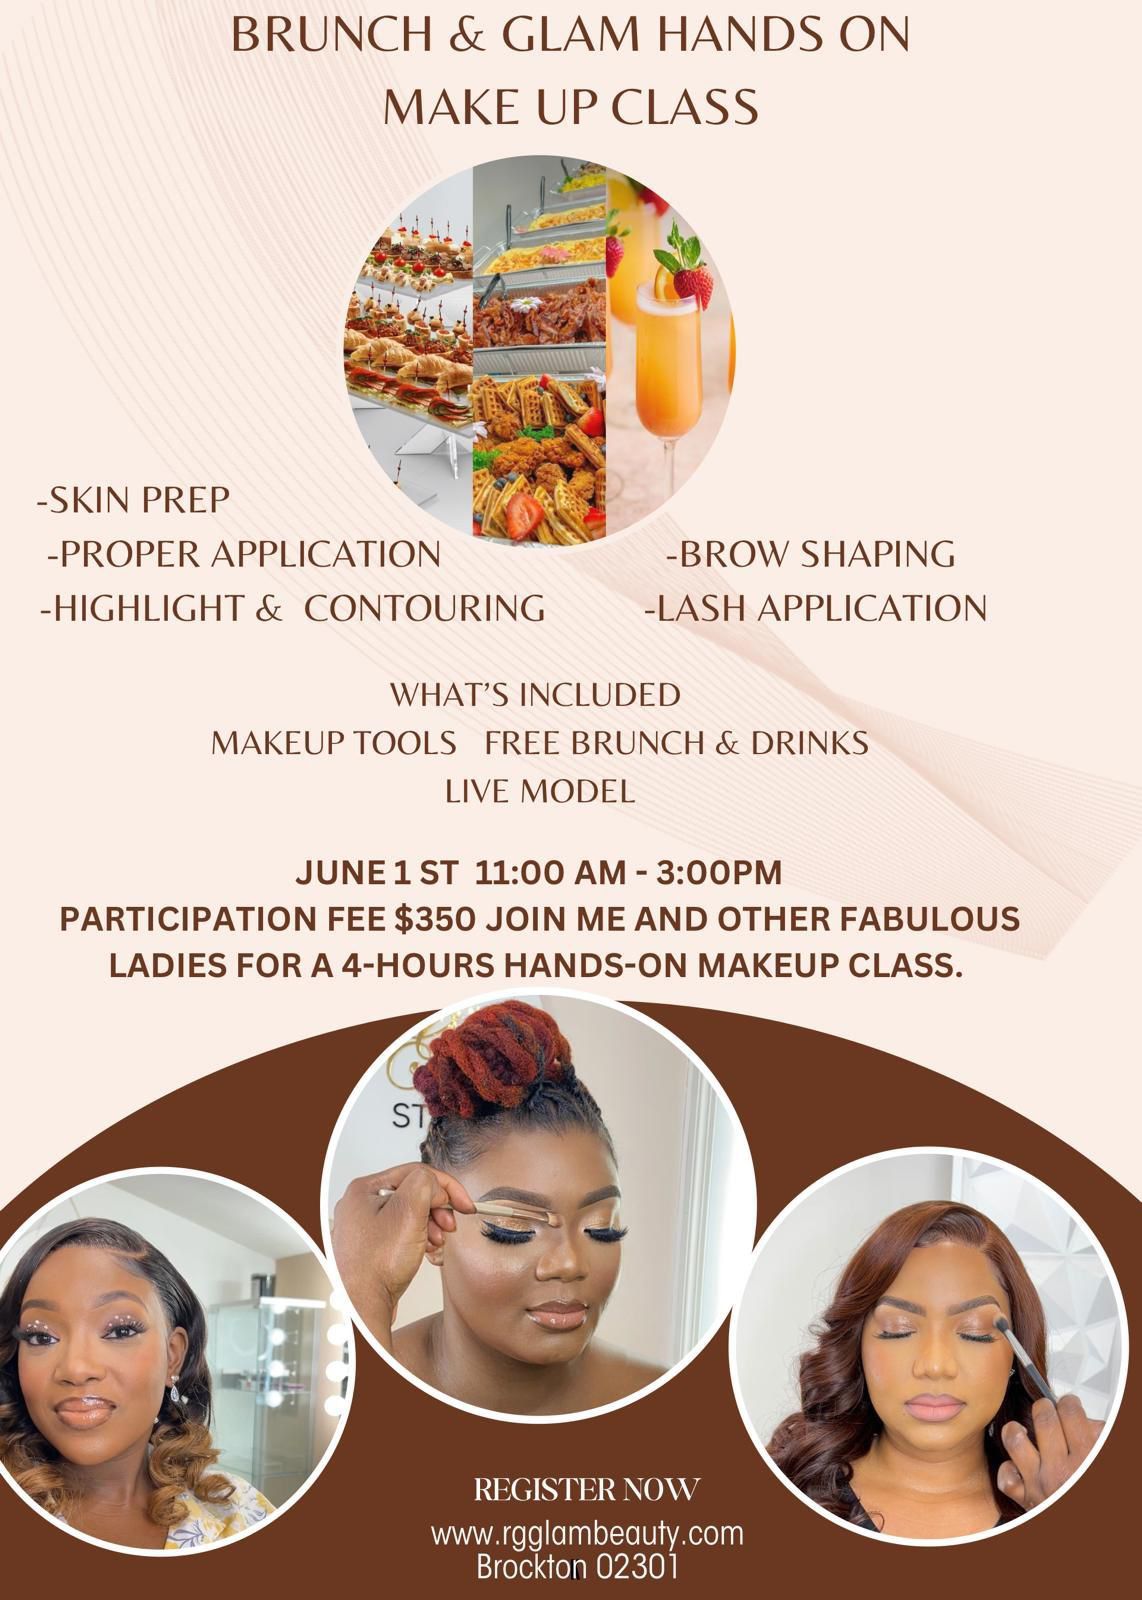 Brunch and Glam Hands on Makeup Class